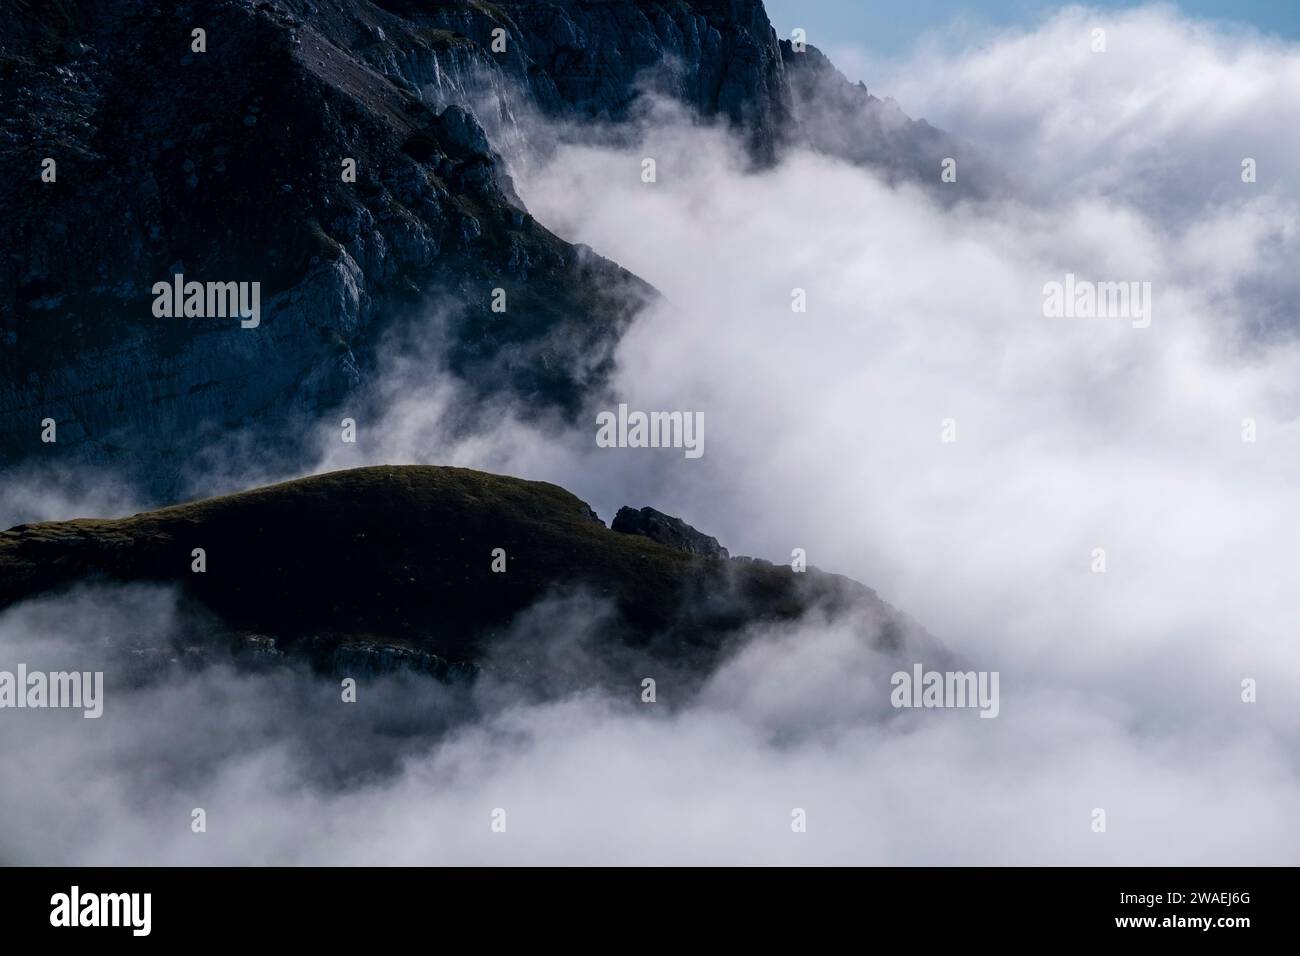 Cliffs and ridges of the mountain Piz Galin sticking out of the clouds, seen from the summit of Croz dell'Altissimo. Stock Photo